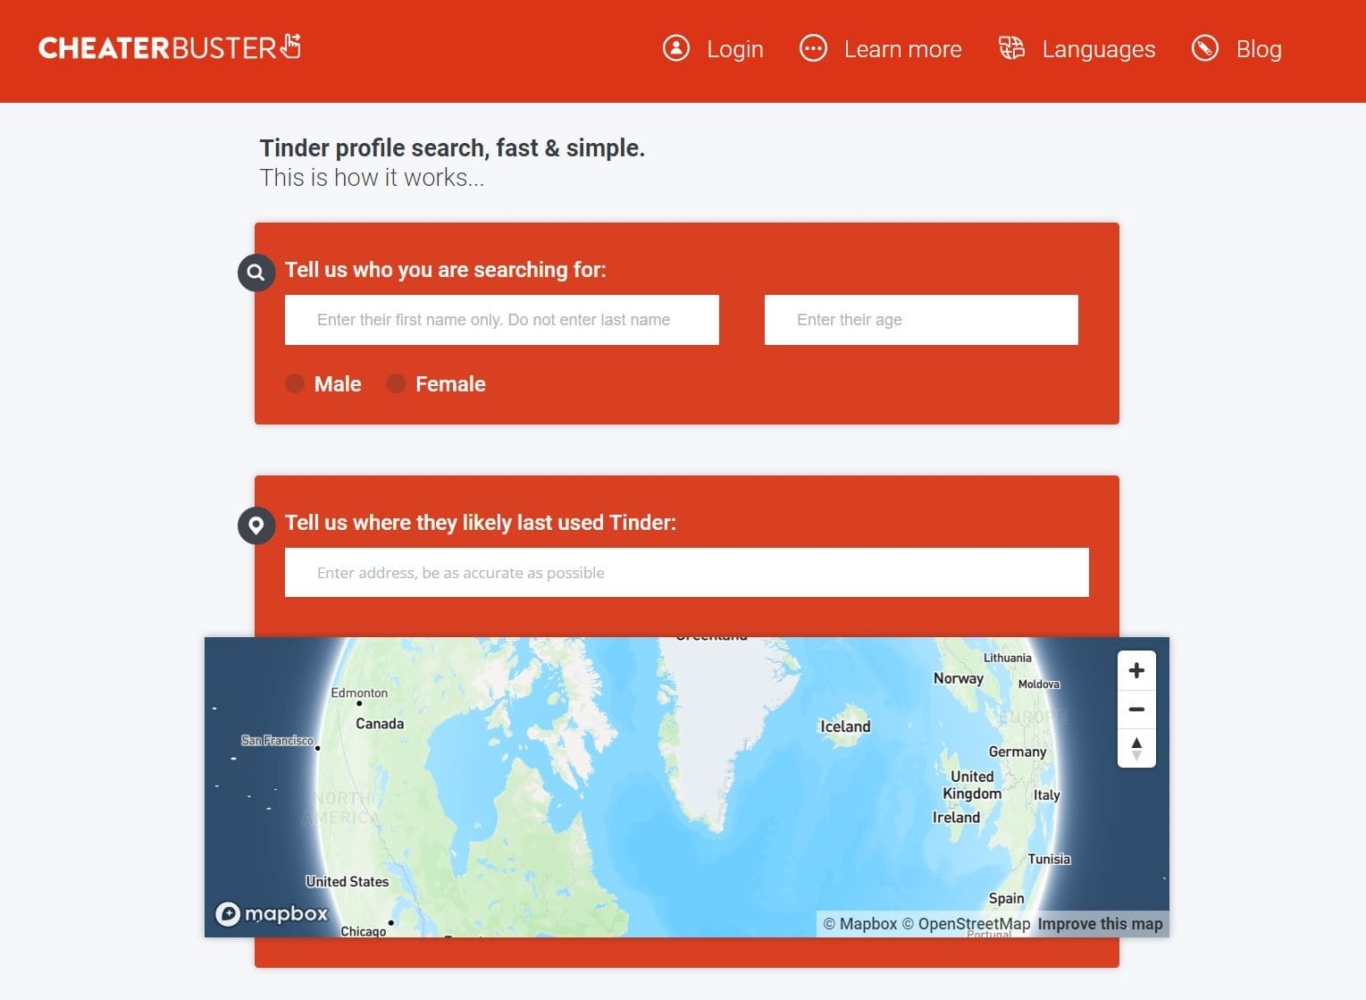 the main page of the Cheaterbuster website, where you can search for information about people from Tinder